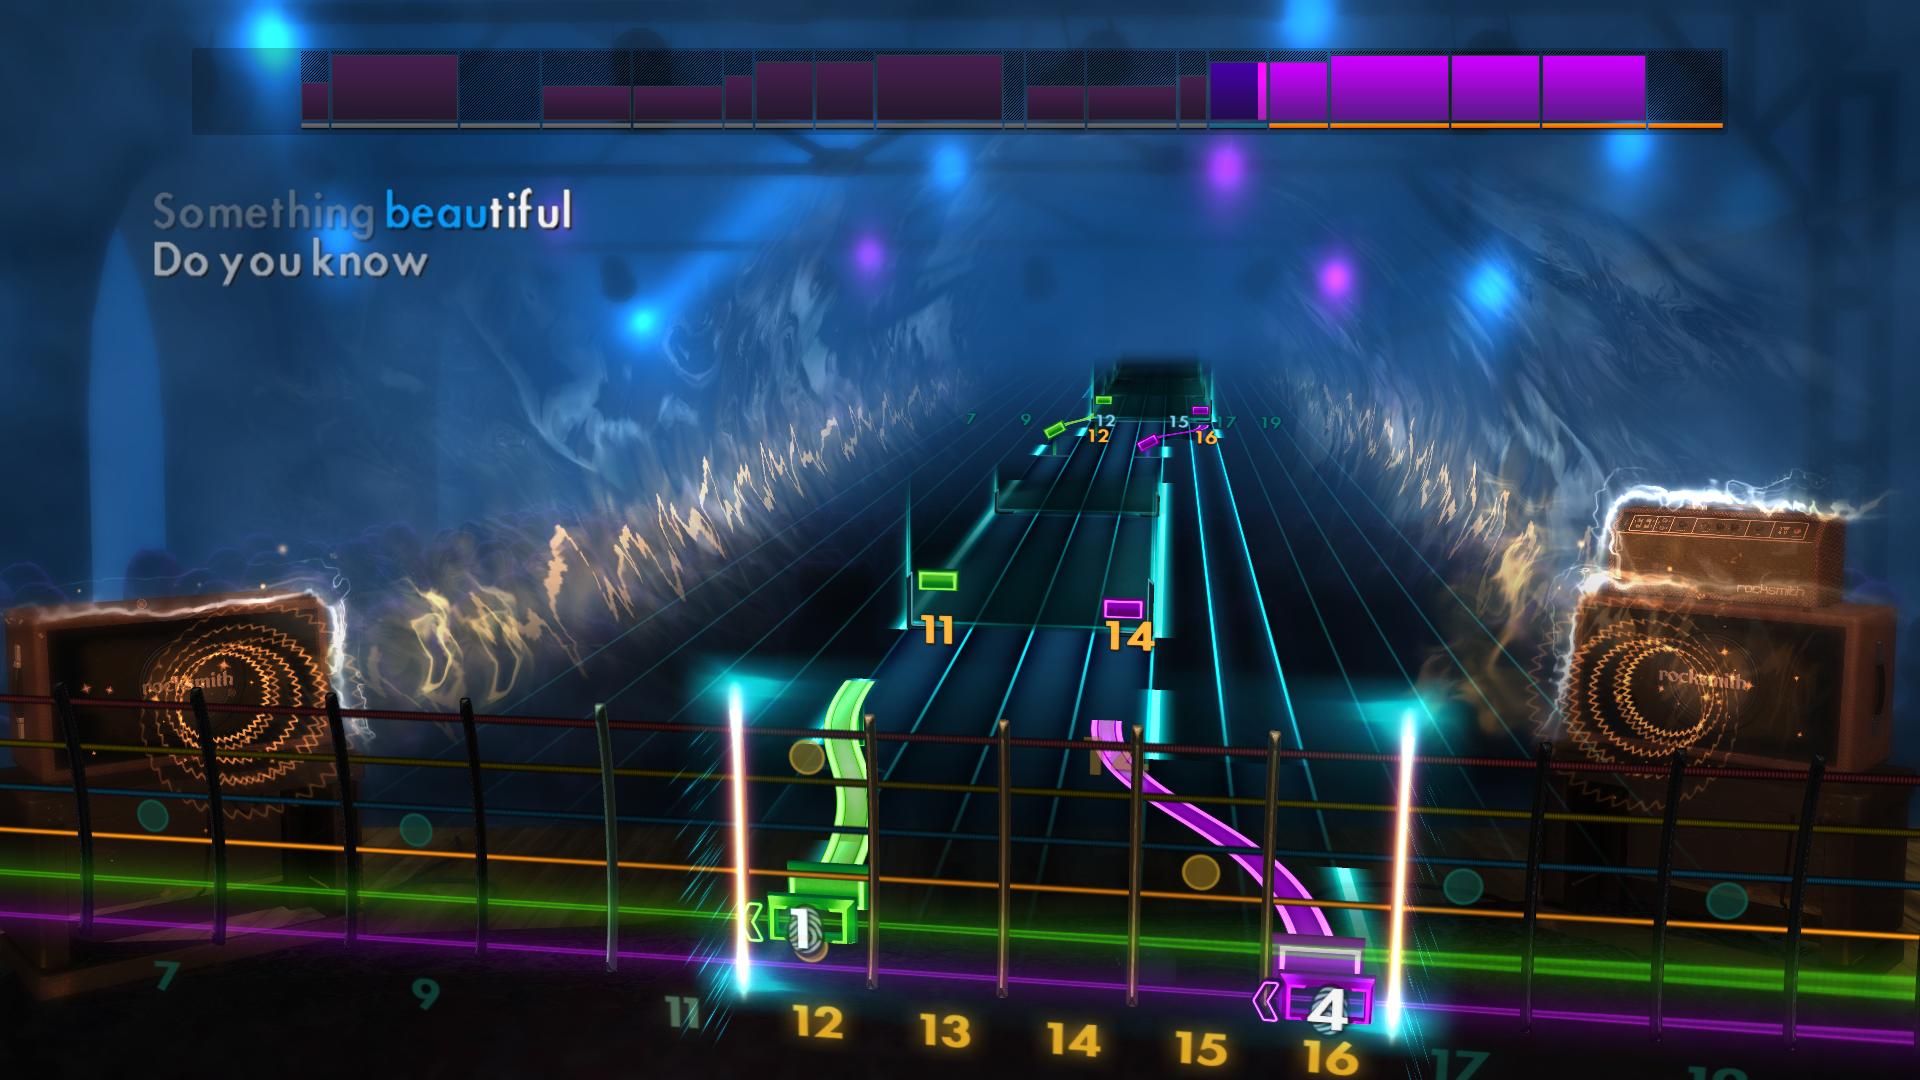 Rocksmith® 2014 Edition – Remastered – Coldplay - “Yellow” Featured Screenshot #1